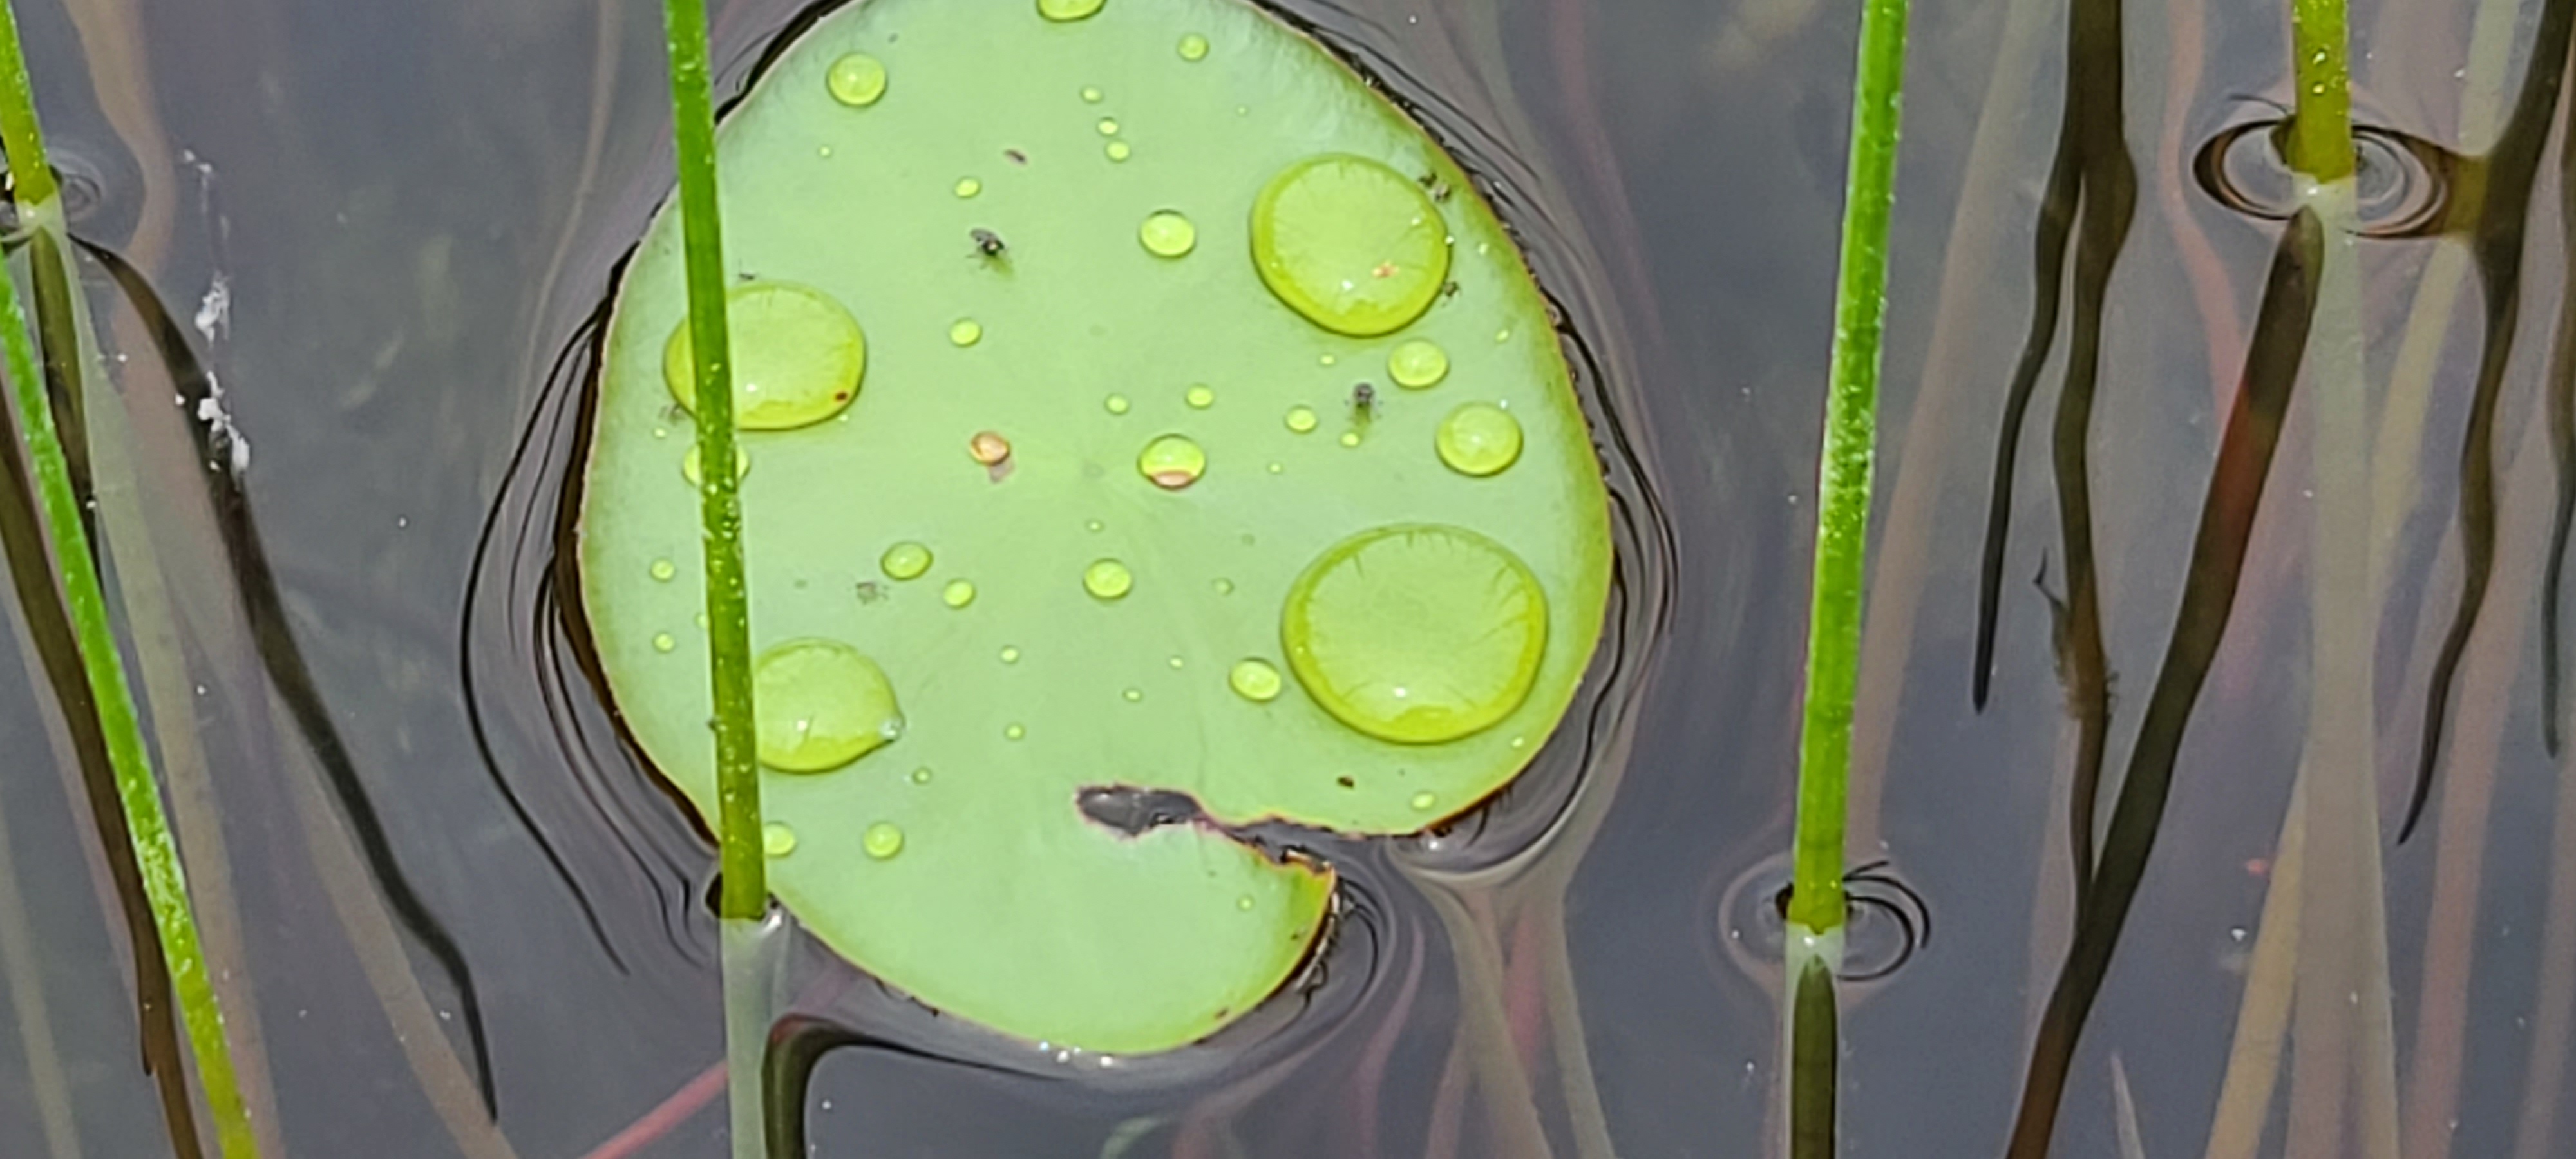 Watershield-with-droplets-June-22-2021